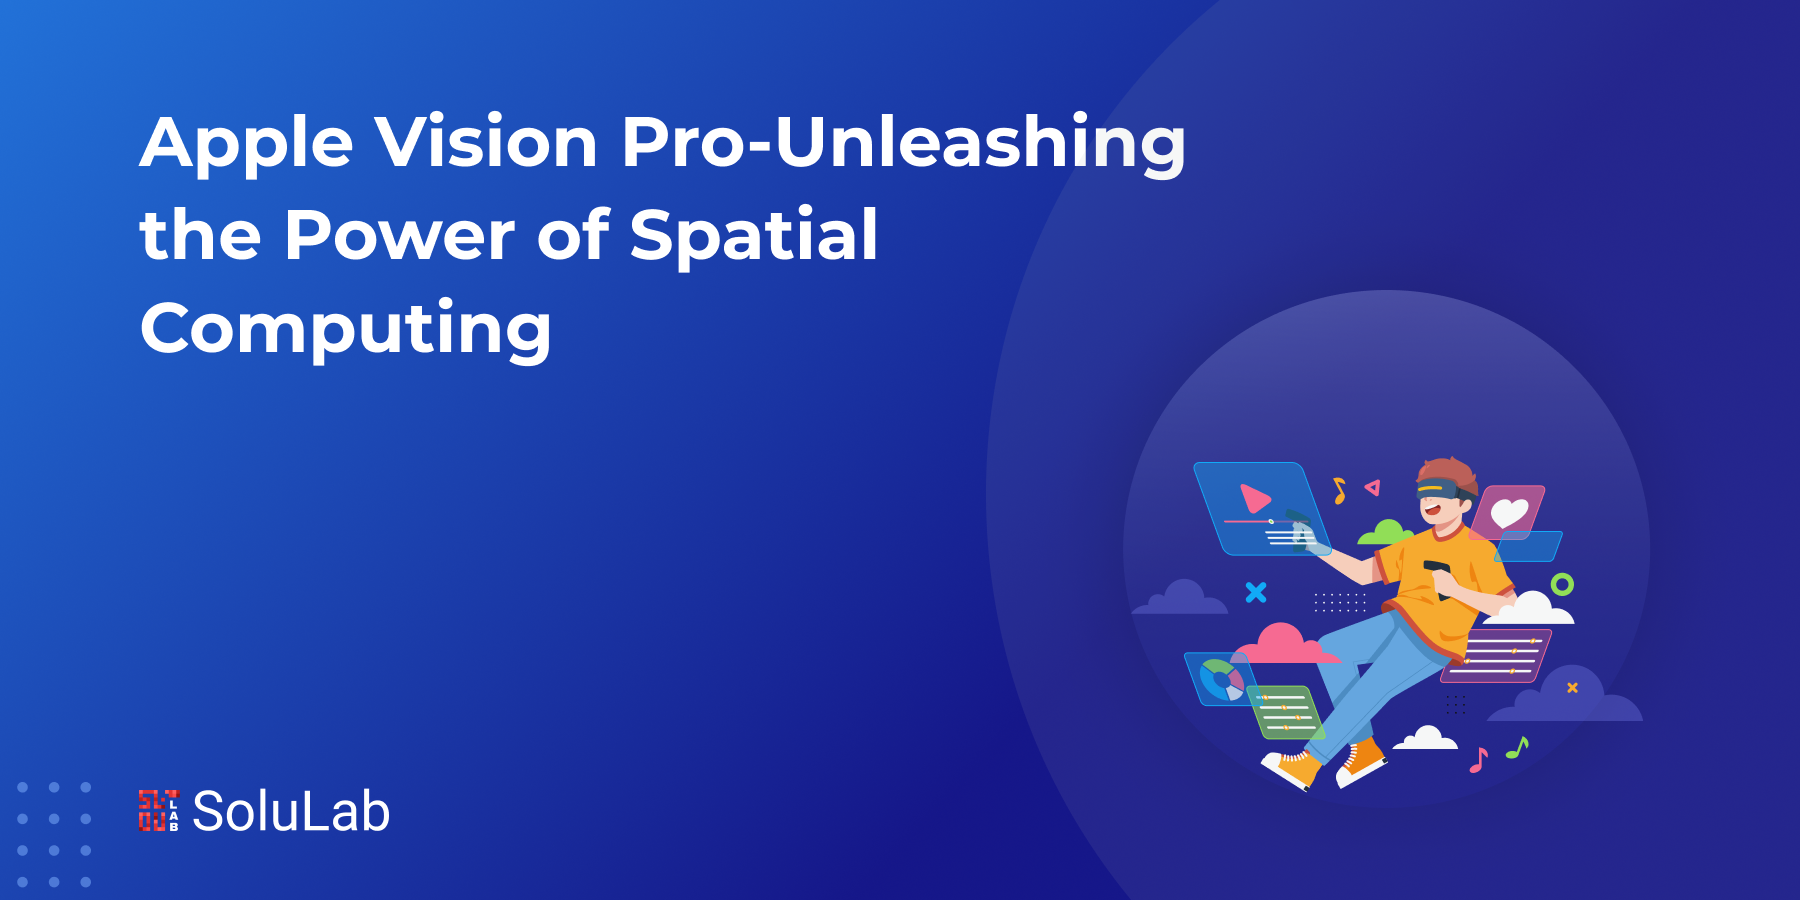 Apple Vision Pro - Unleashing the Power of Spatial Computing